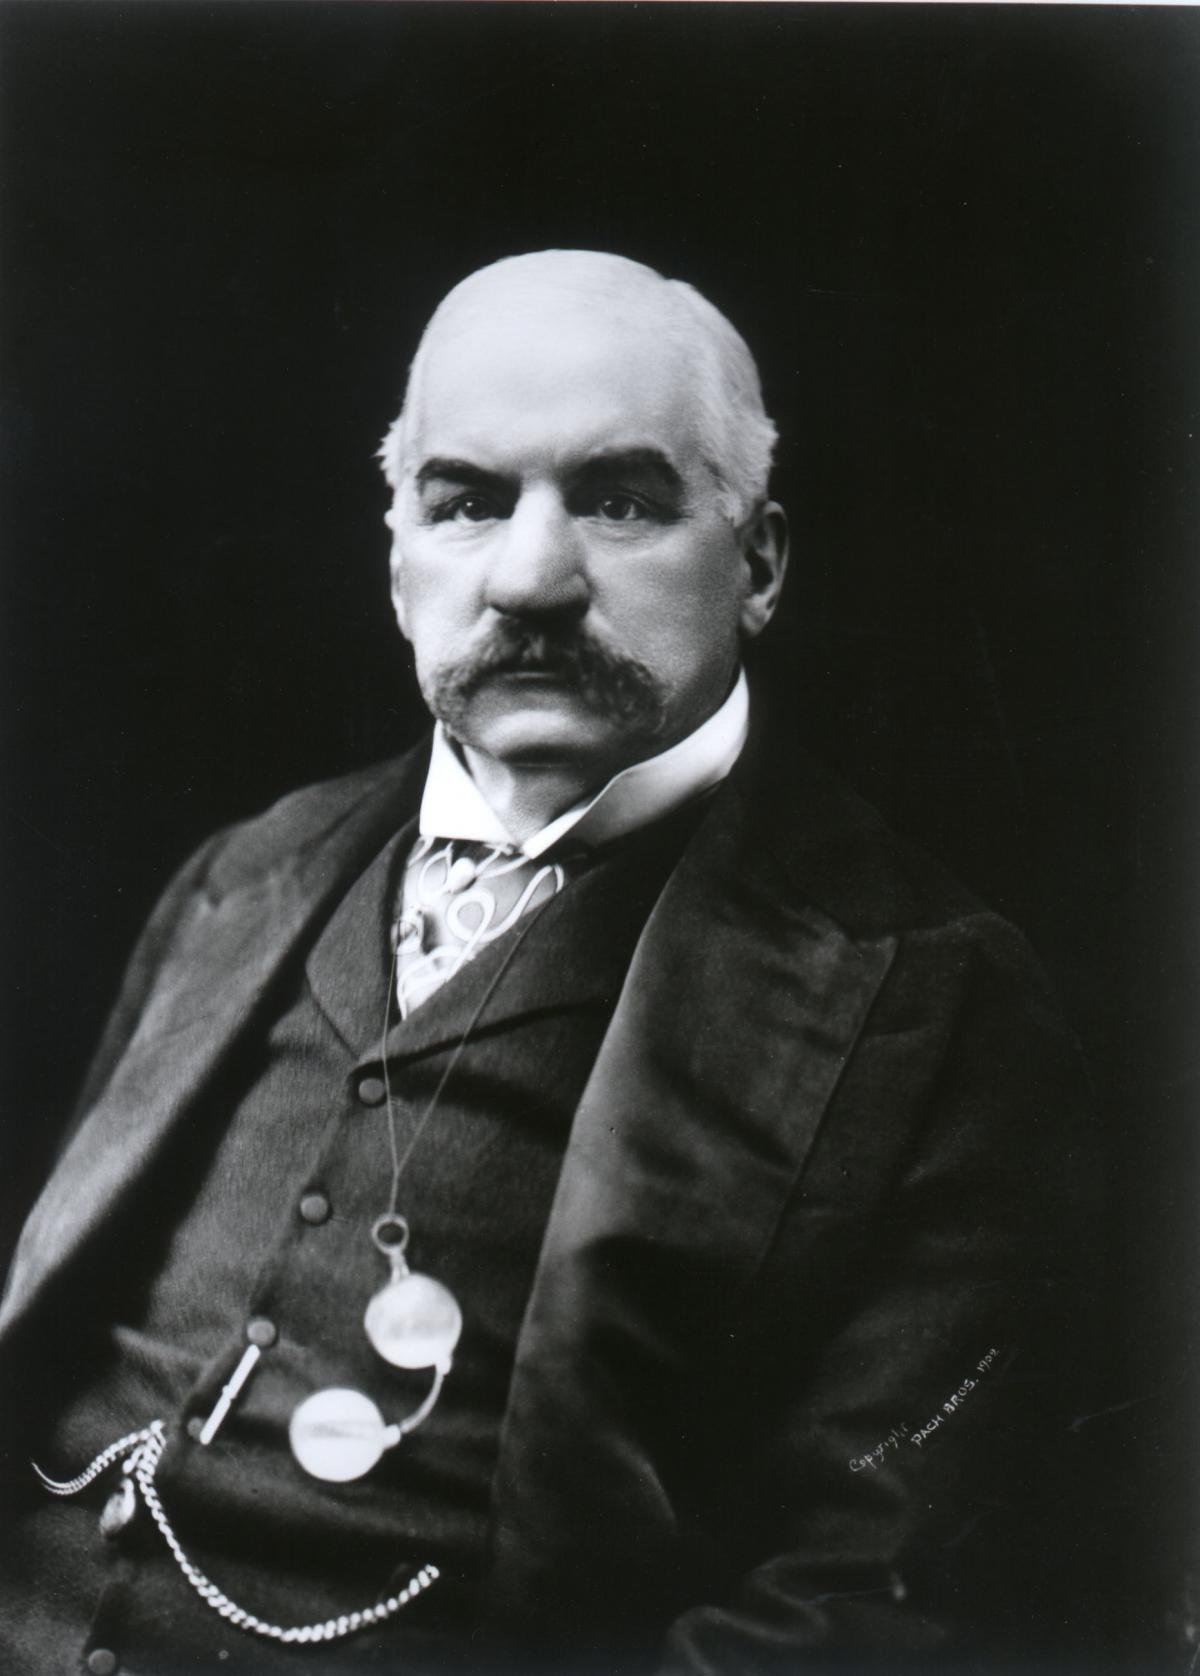 Morgan wearing a black coat, vest, and a watch chain, with a thick moustache